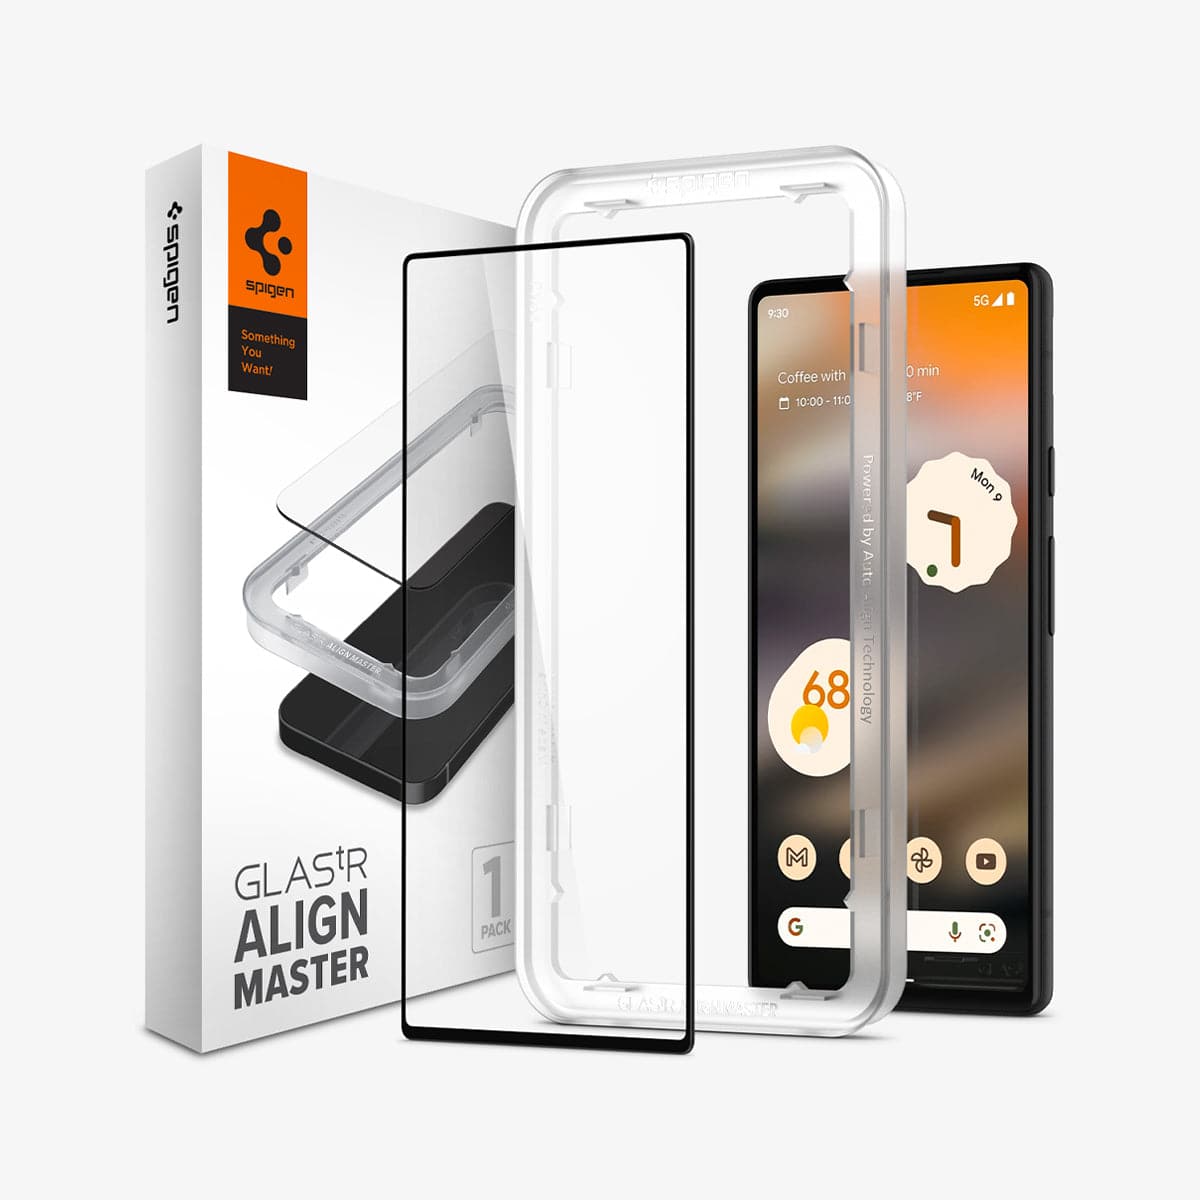 AGL04694 - Pixel 6a Screen Protector AlignMaster GLAS.tR Full Cover showing the device, alignmaster tray, screen protector and packaging